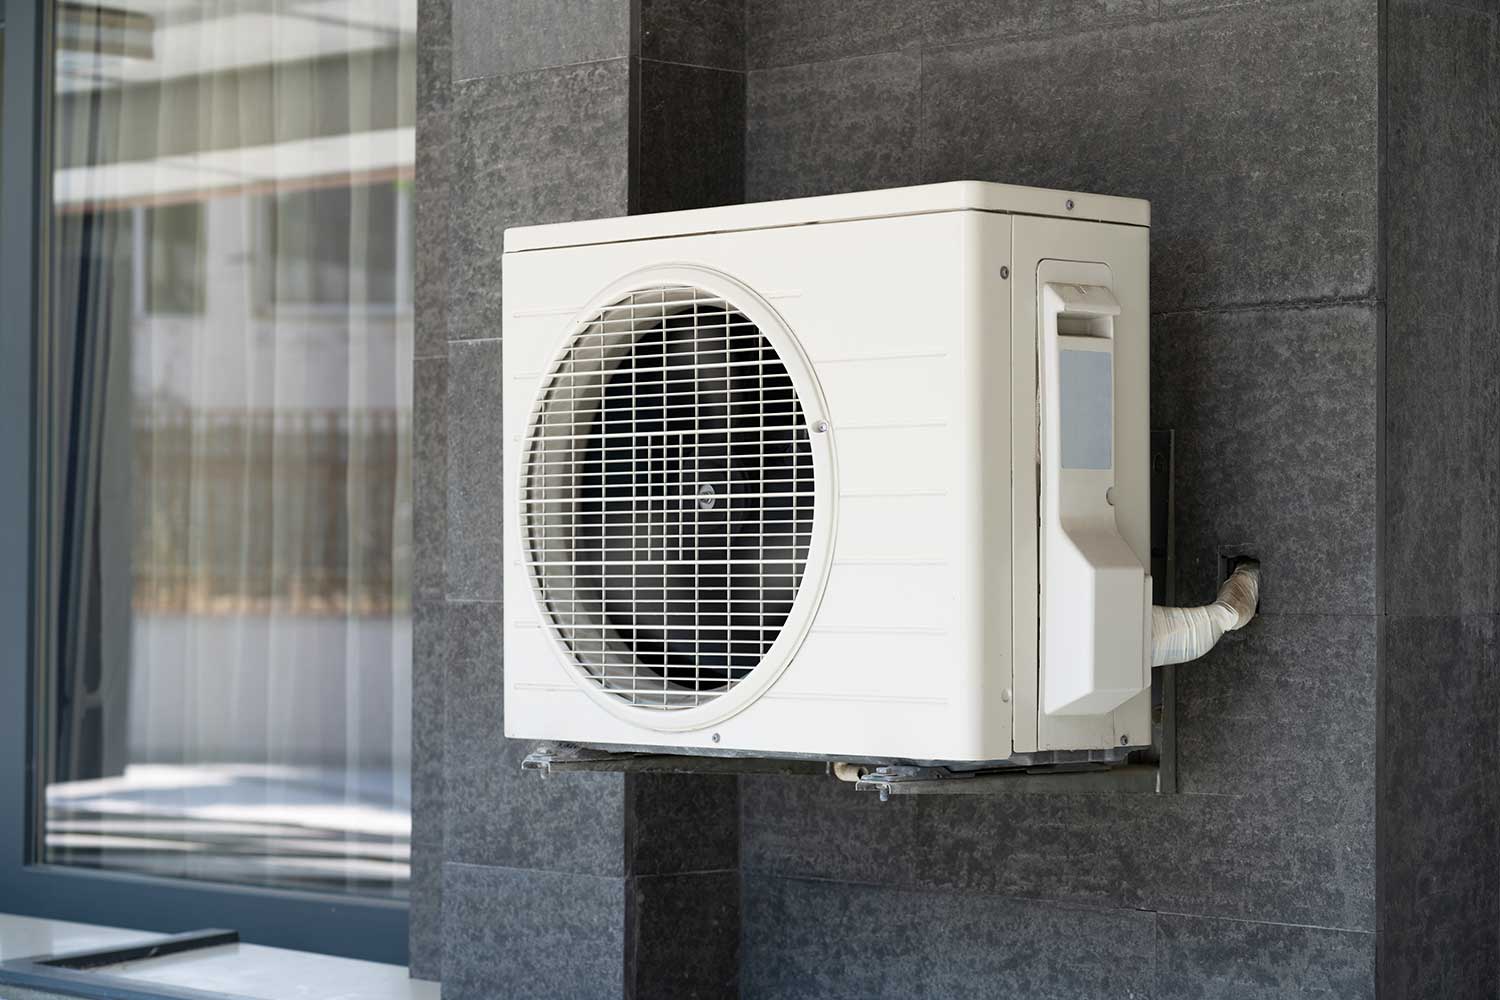 Moving into a condo with modern heating technology